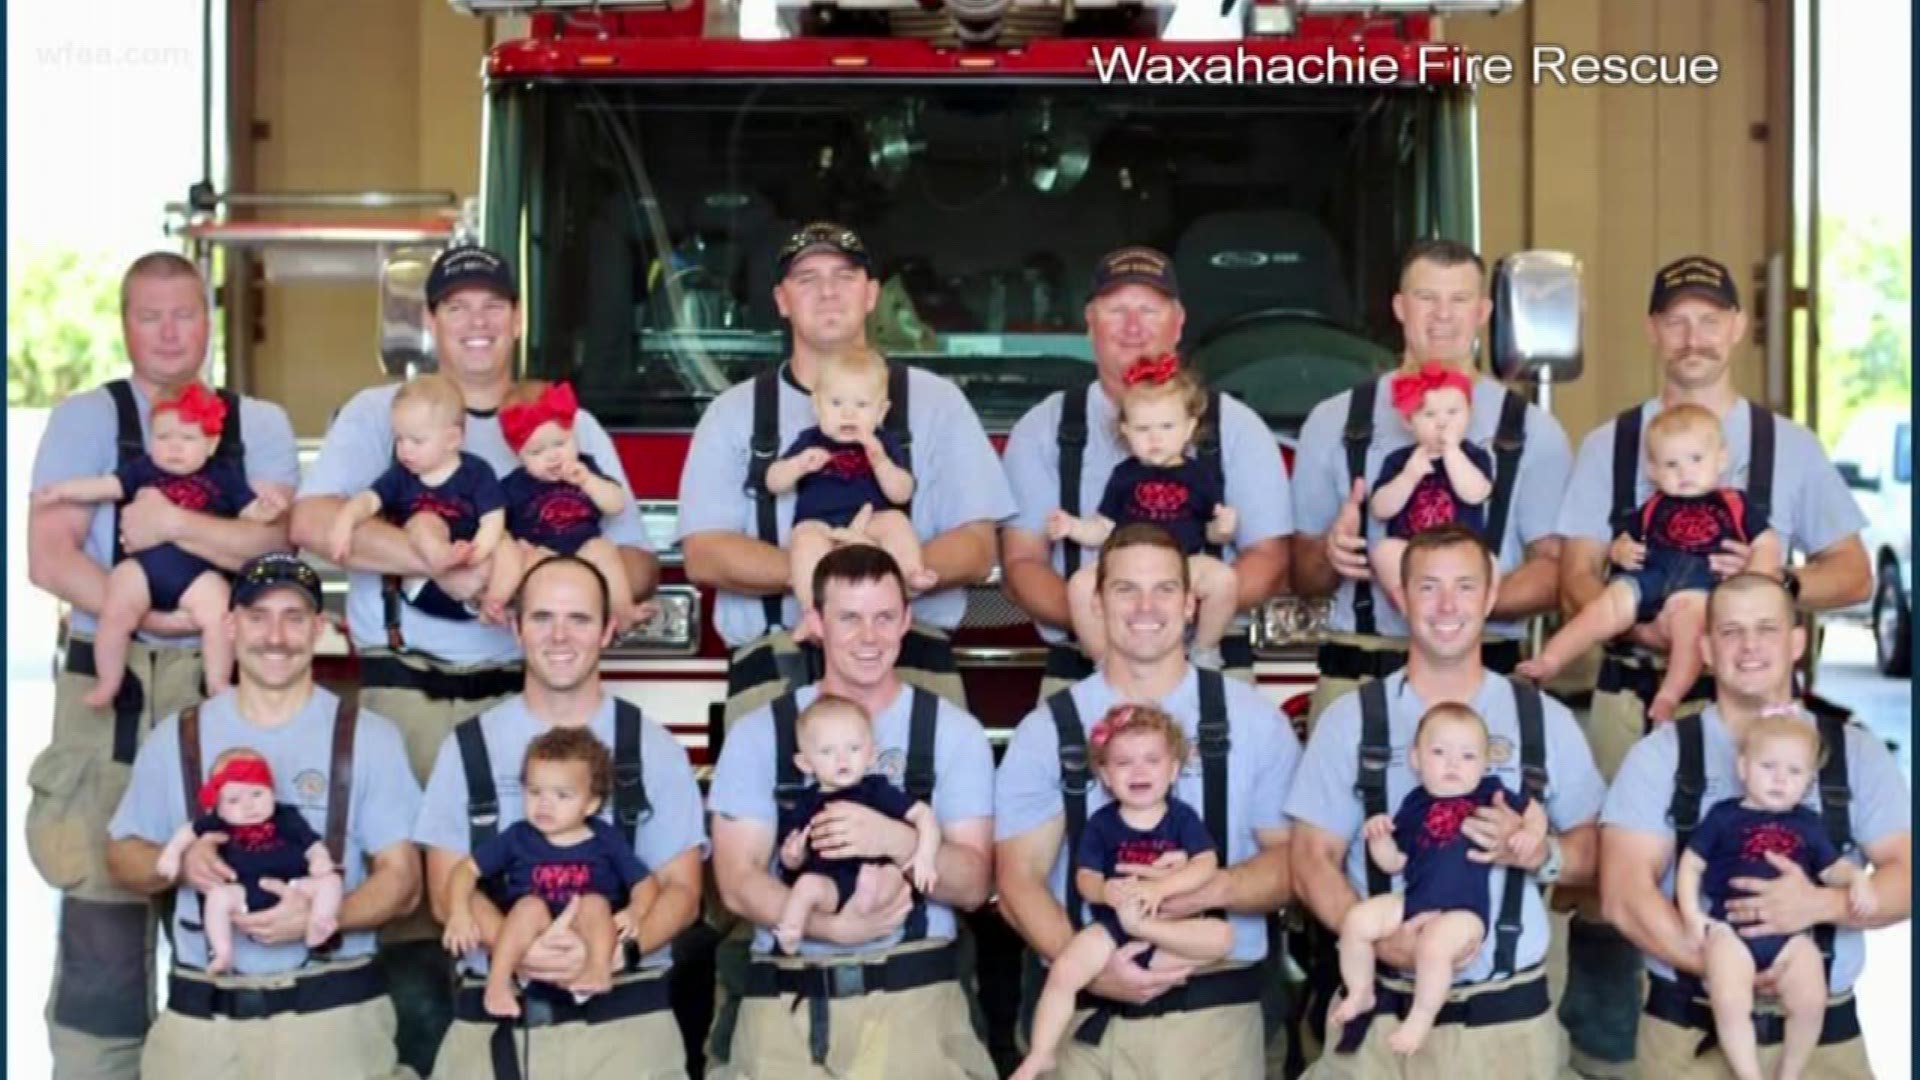 It's a baby boom for the Waxahachie Fire-Rescue Department